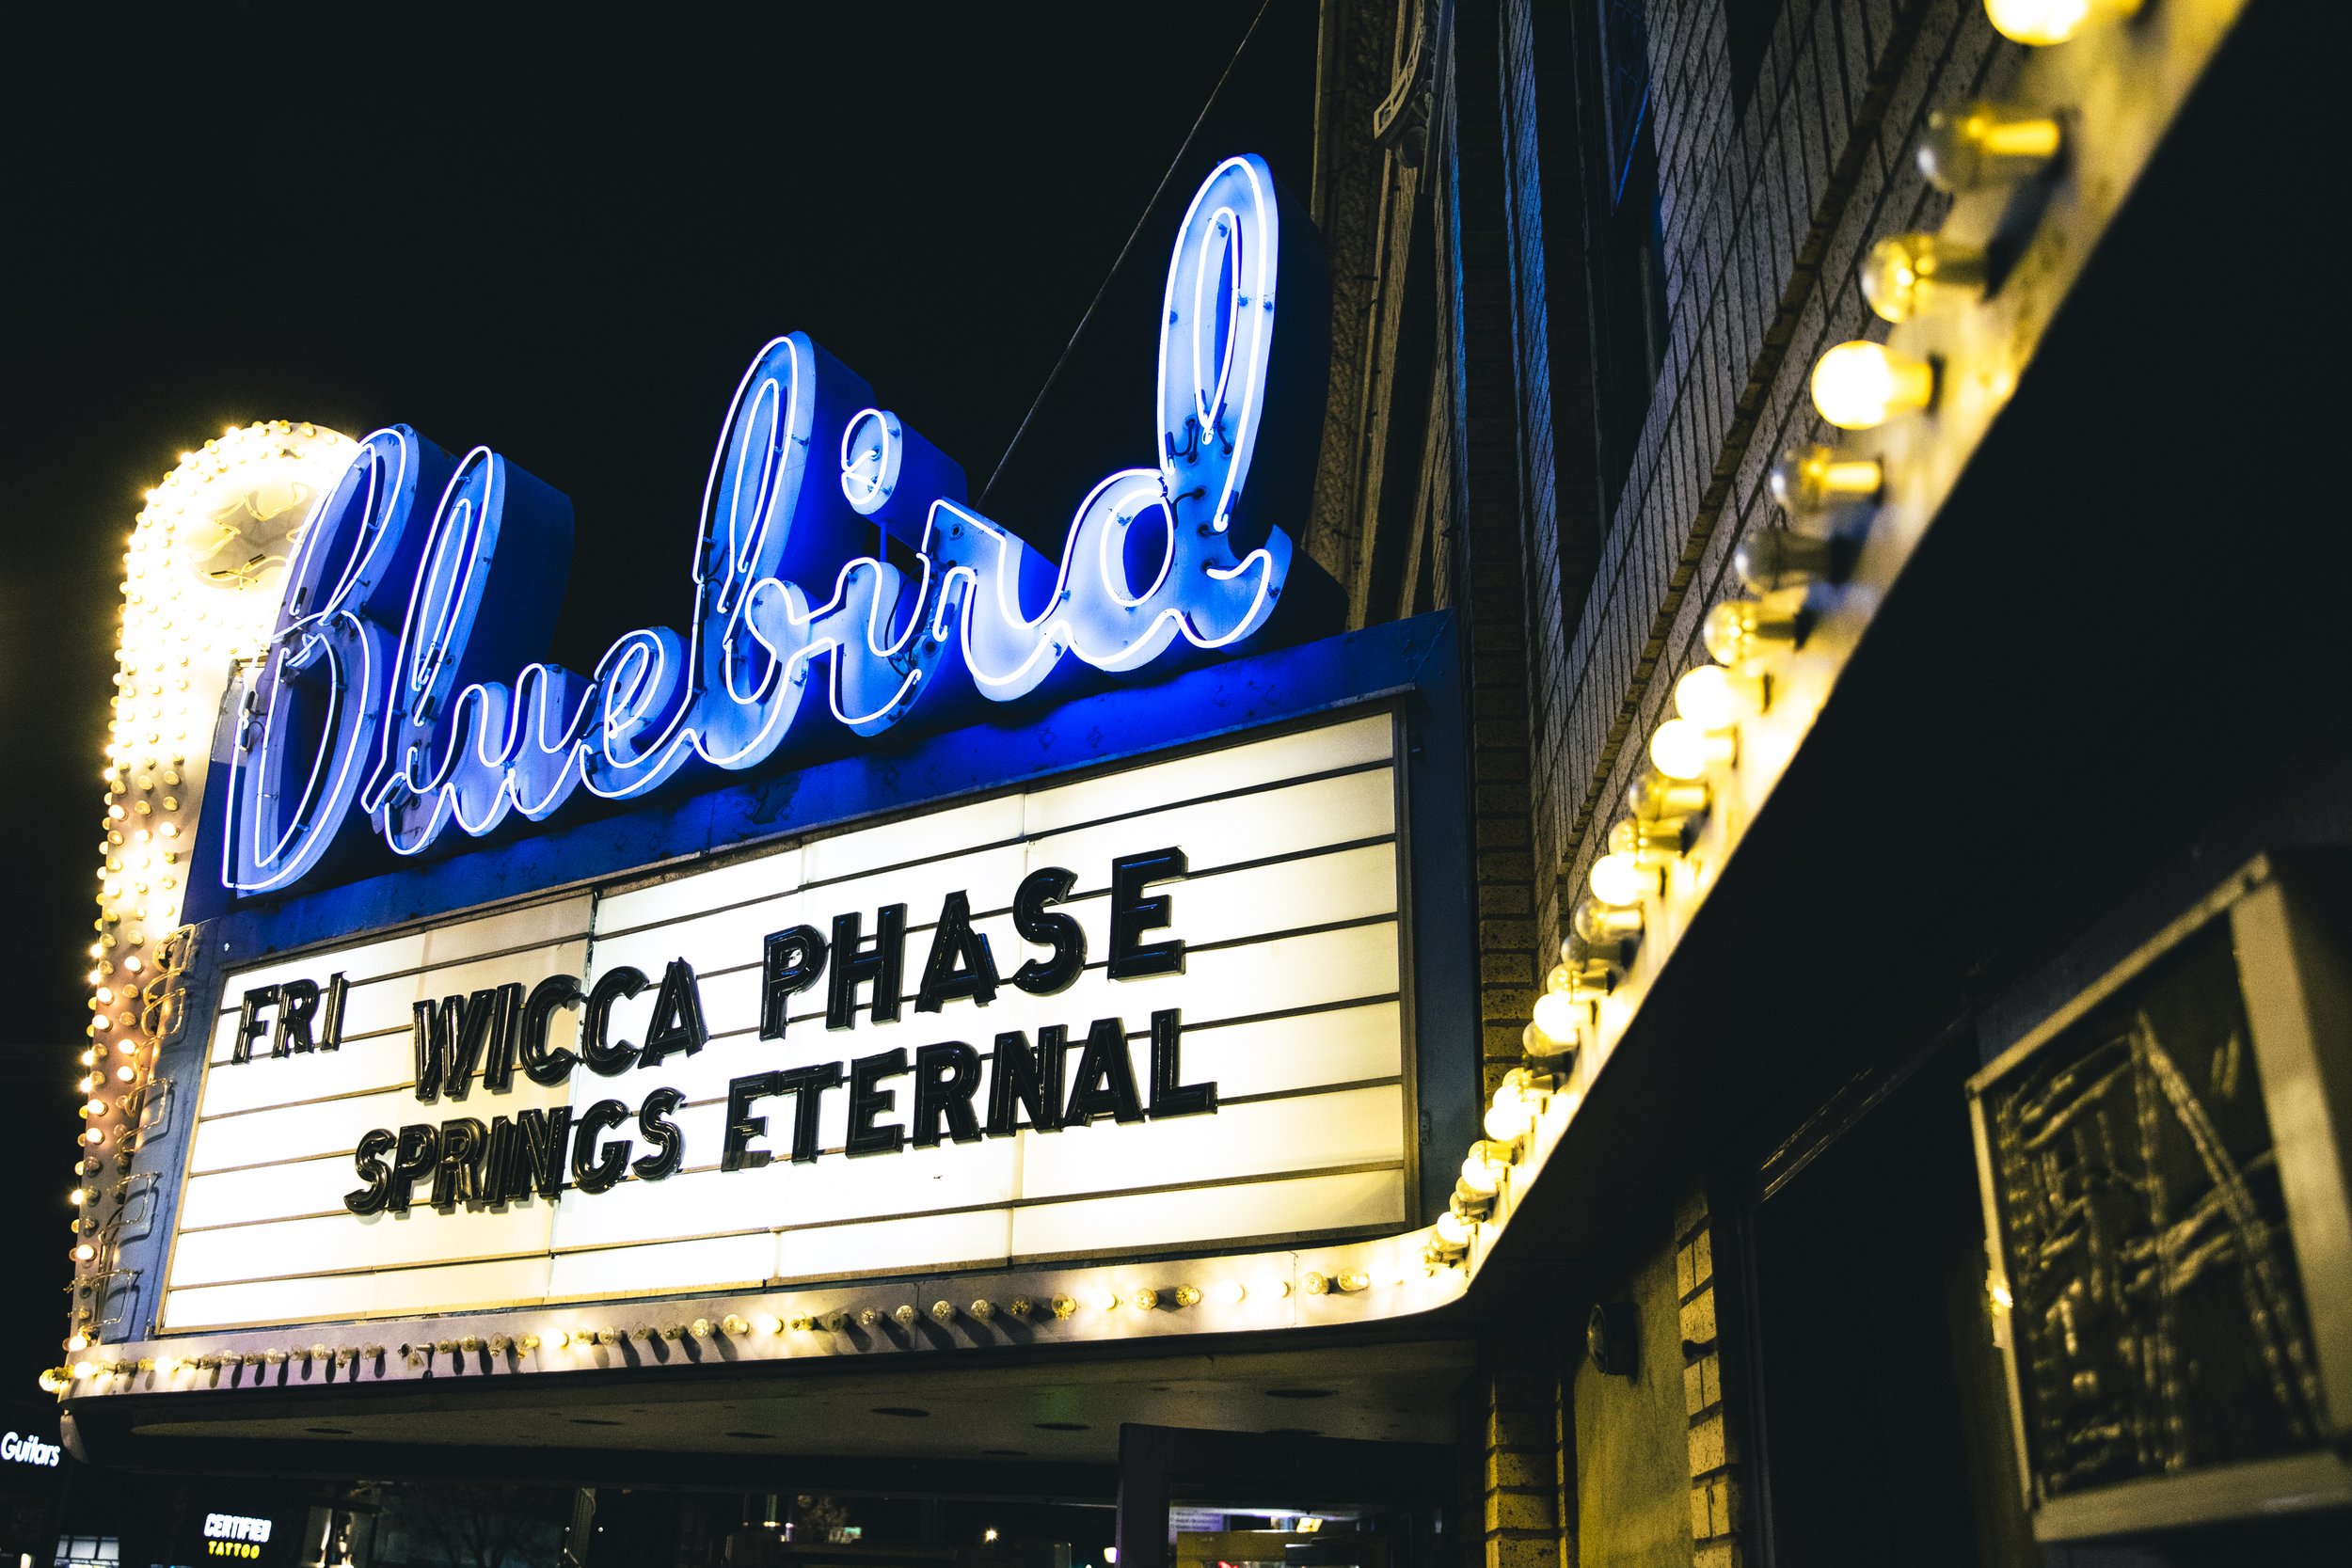 Wicca Phase Springs Eternal -  WINTER TOUR 2022 - The Bluebird Theater - Denver, Colorado - Friday, December 16, 2022- PHOTO BY Mowgli Miles of Interracial Friends - PHOTO BY Mowgli Miles of Interracial Friends-23.JPG